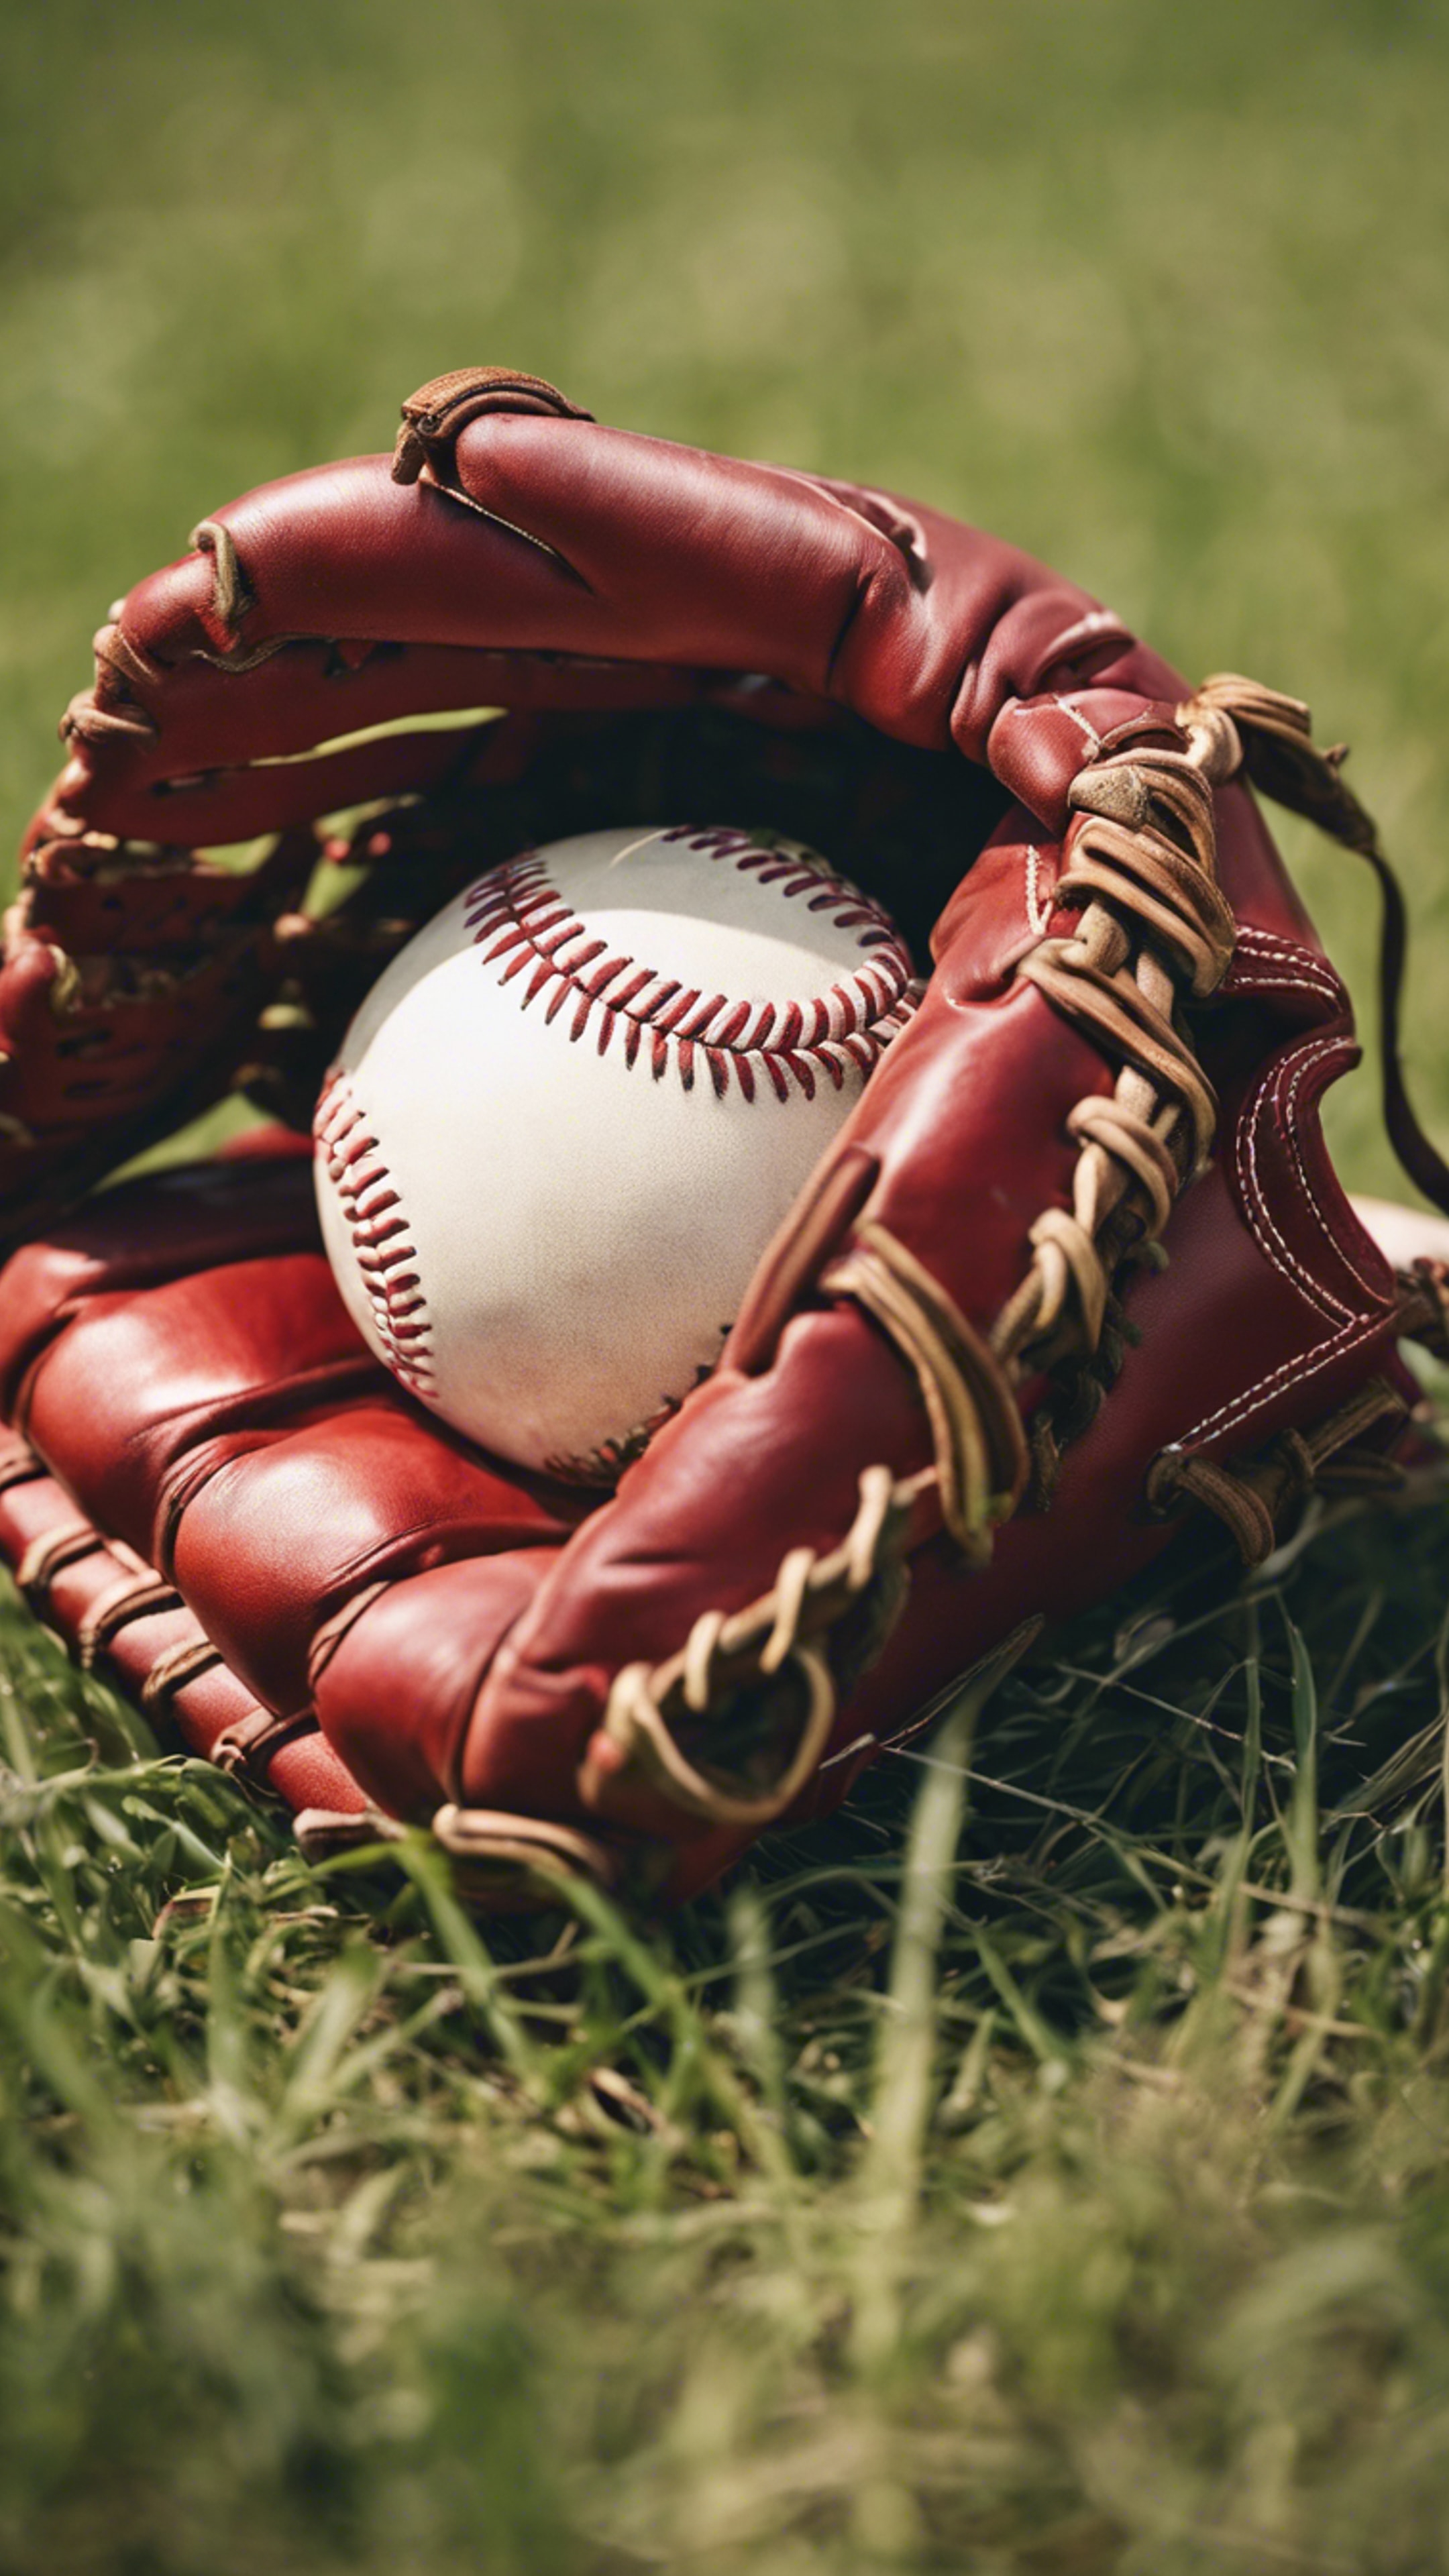 A striking red leather baseball glove on a grassy field right after a game. Tapeta[10102f7c198241d6b5bd]